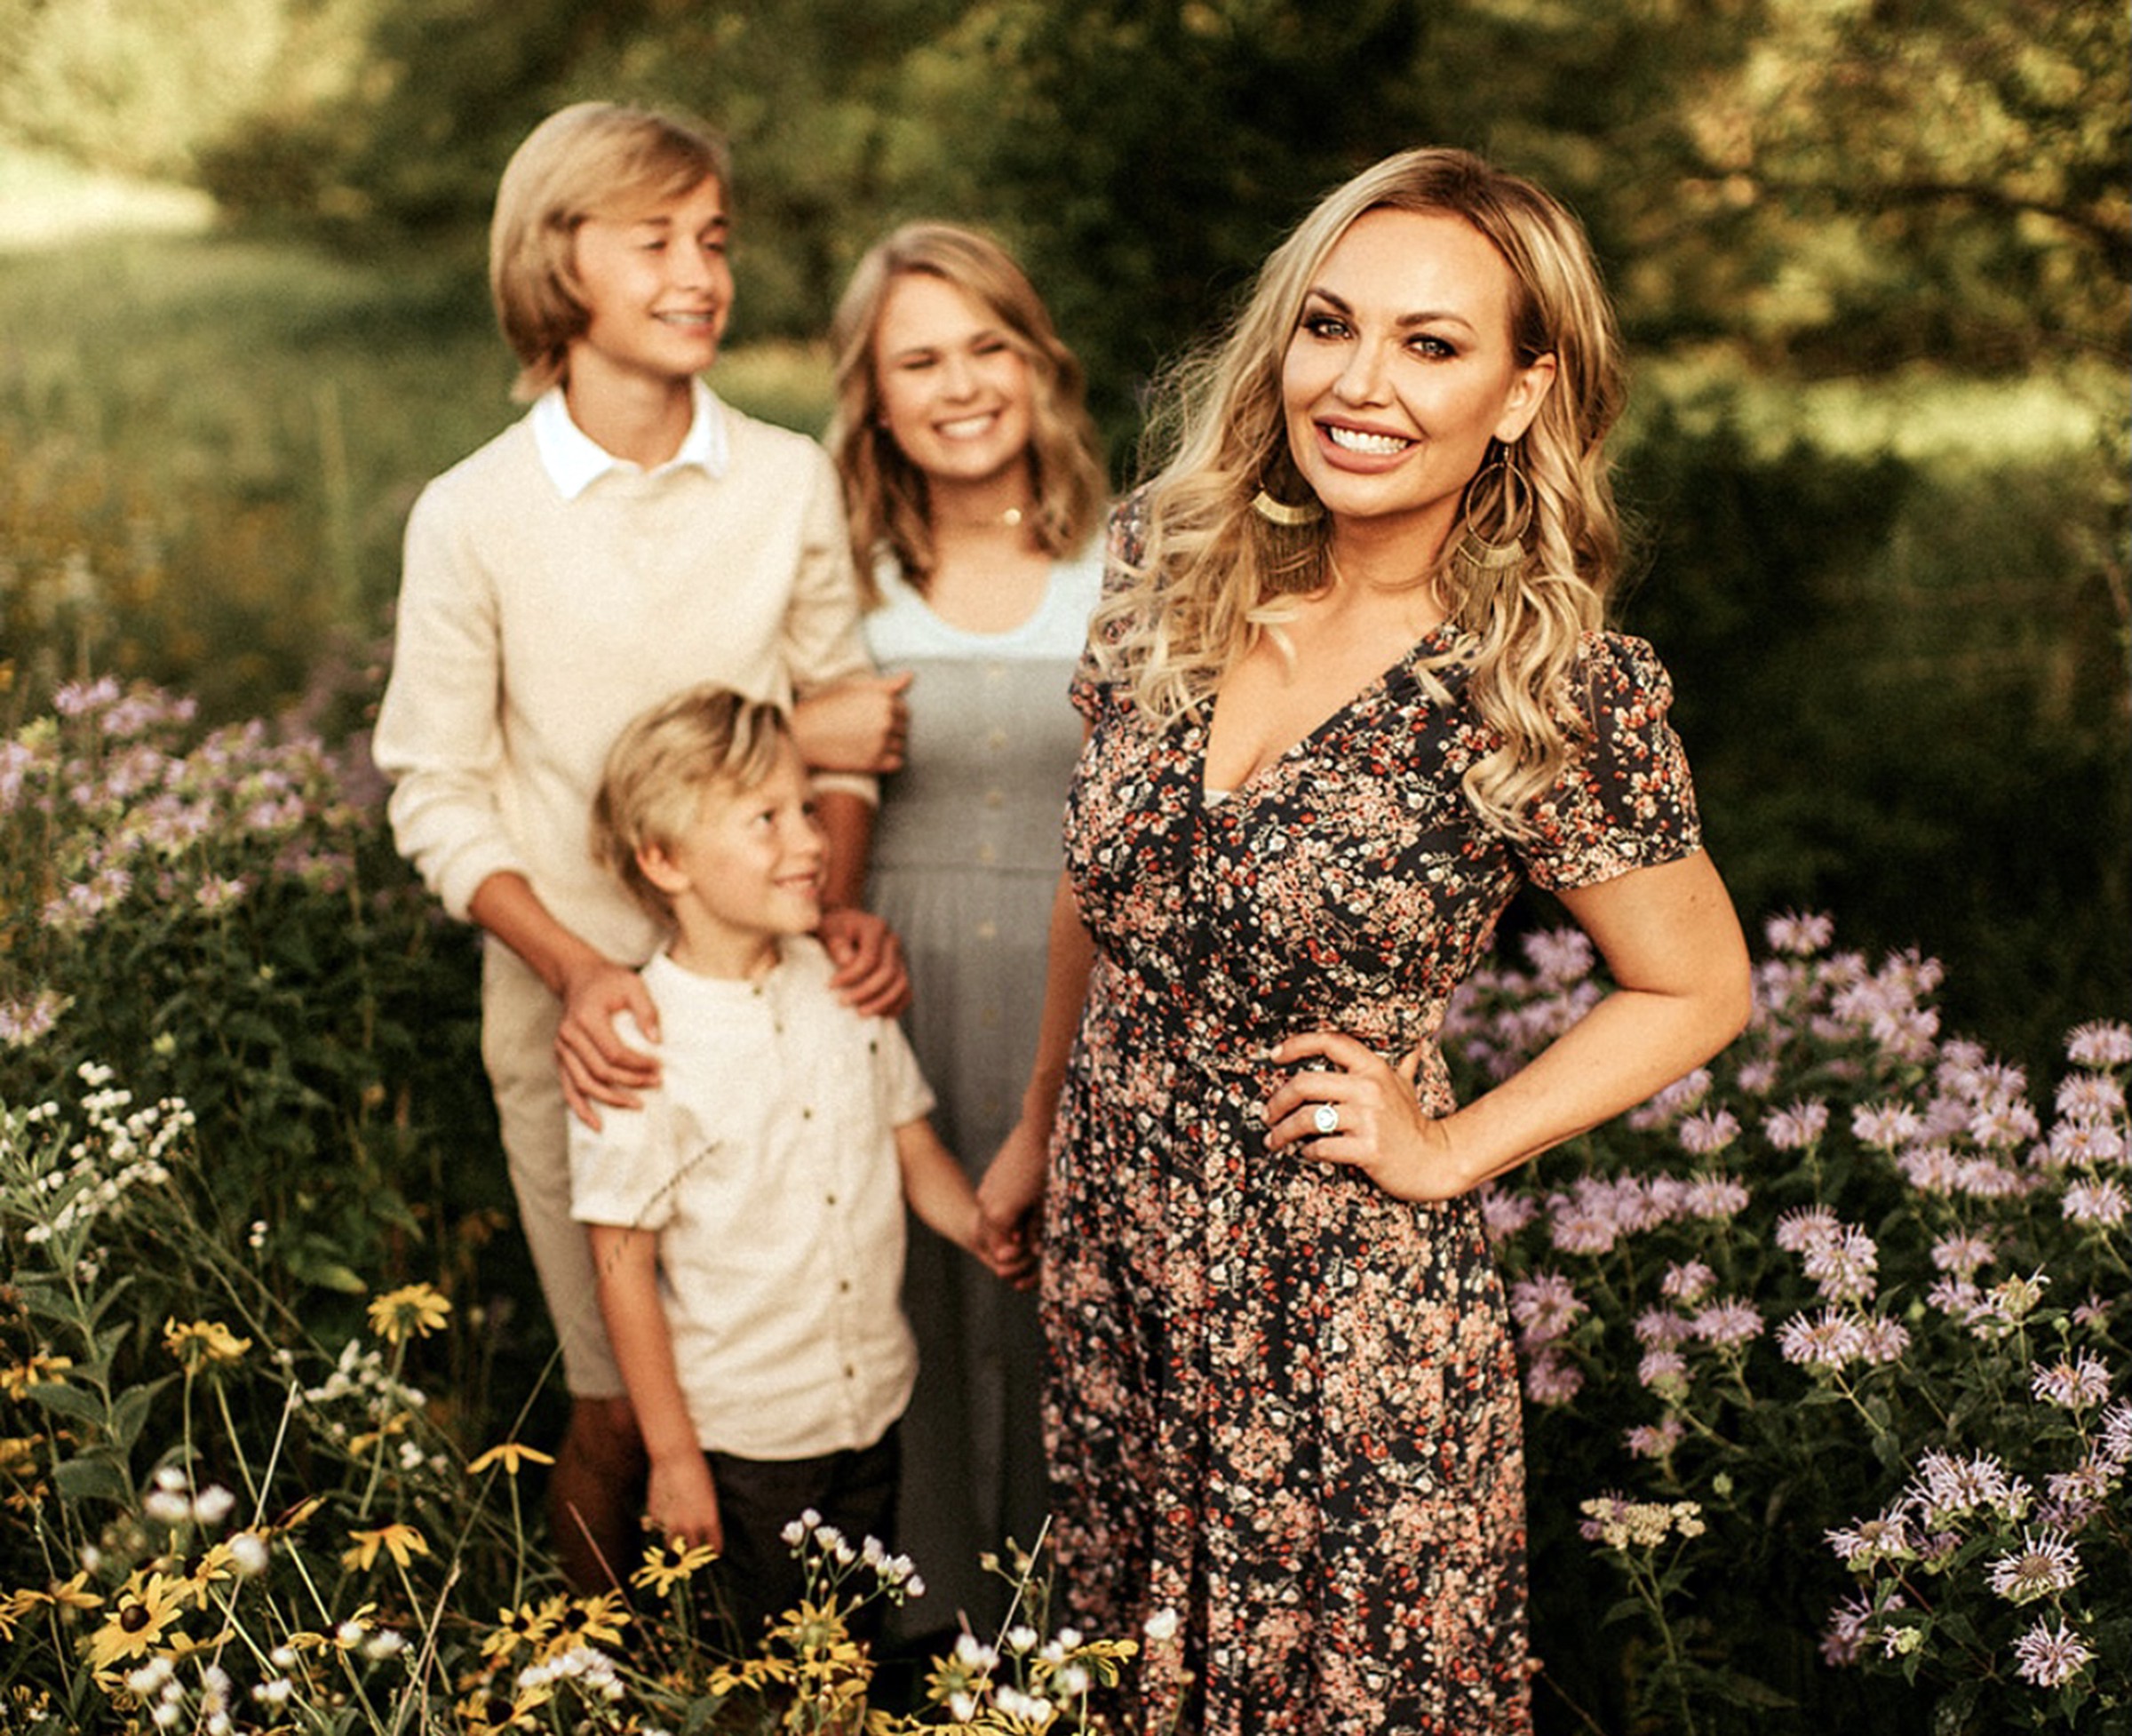 Jessica Koehler, who won 2020's Mrs. Minnesota pageant, with her family